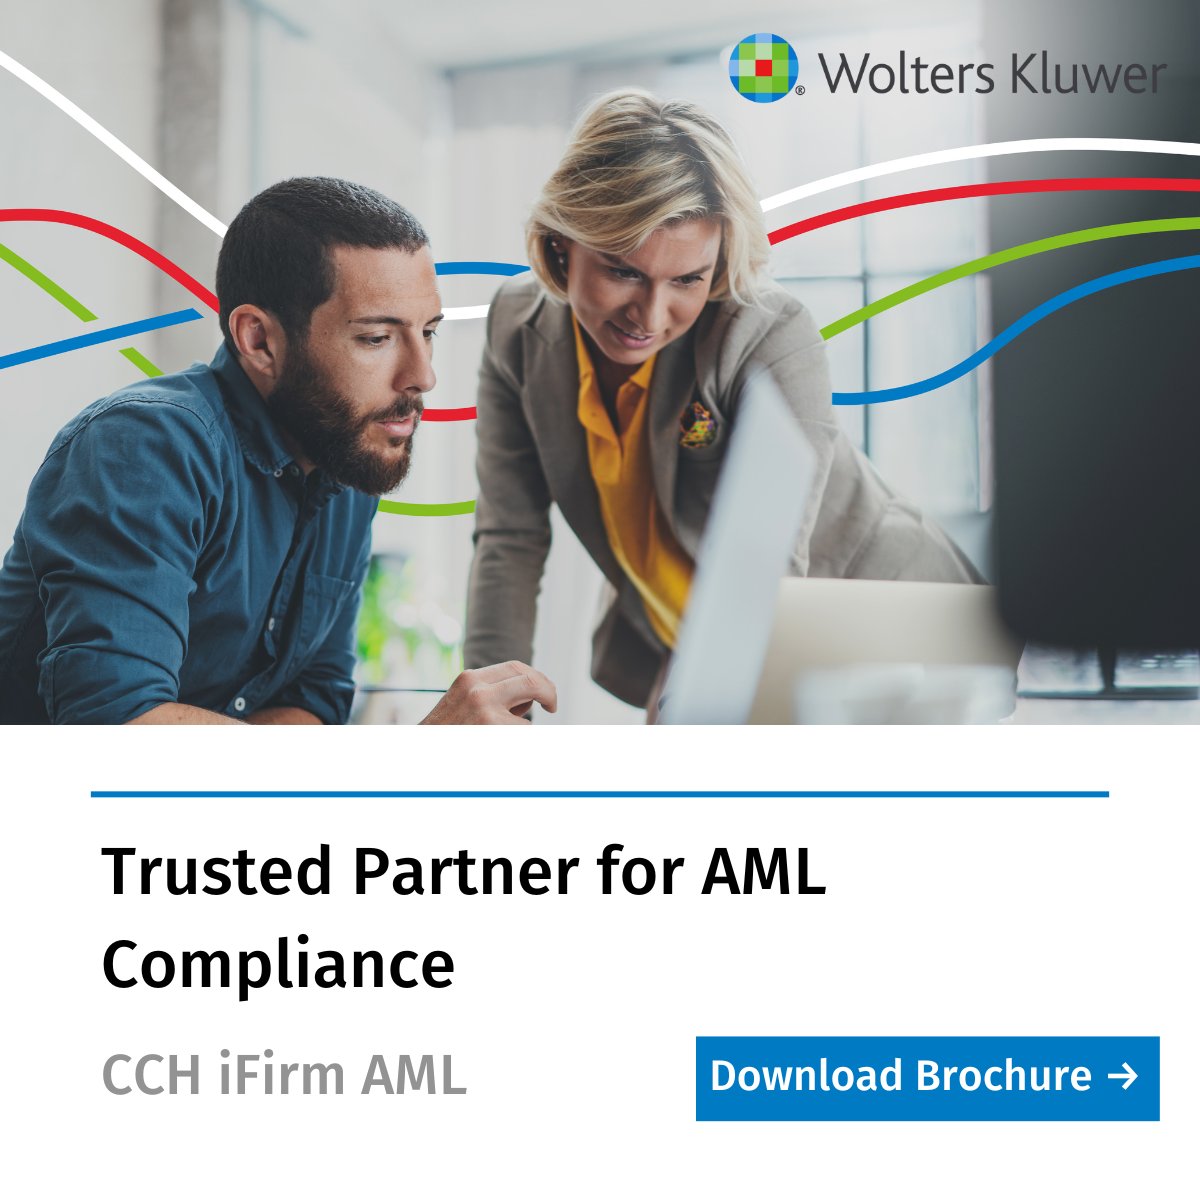 Why Choose CCH iFirm AML for Anti-Money Laundering Compliance?
Streamline AML compliance, save time, minimise risks, and safeguard your firm and staff from potential criminal dealings.

Download CCH iFirm AML brochure- bit.ly/48IHL8Q

#AntiMoneyLaundering #AML #CCHiFirm